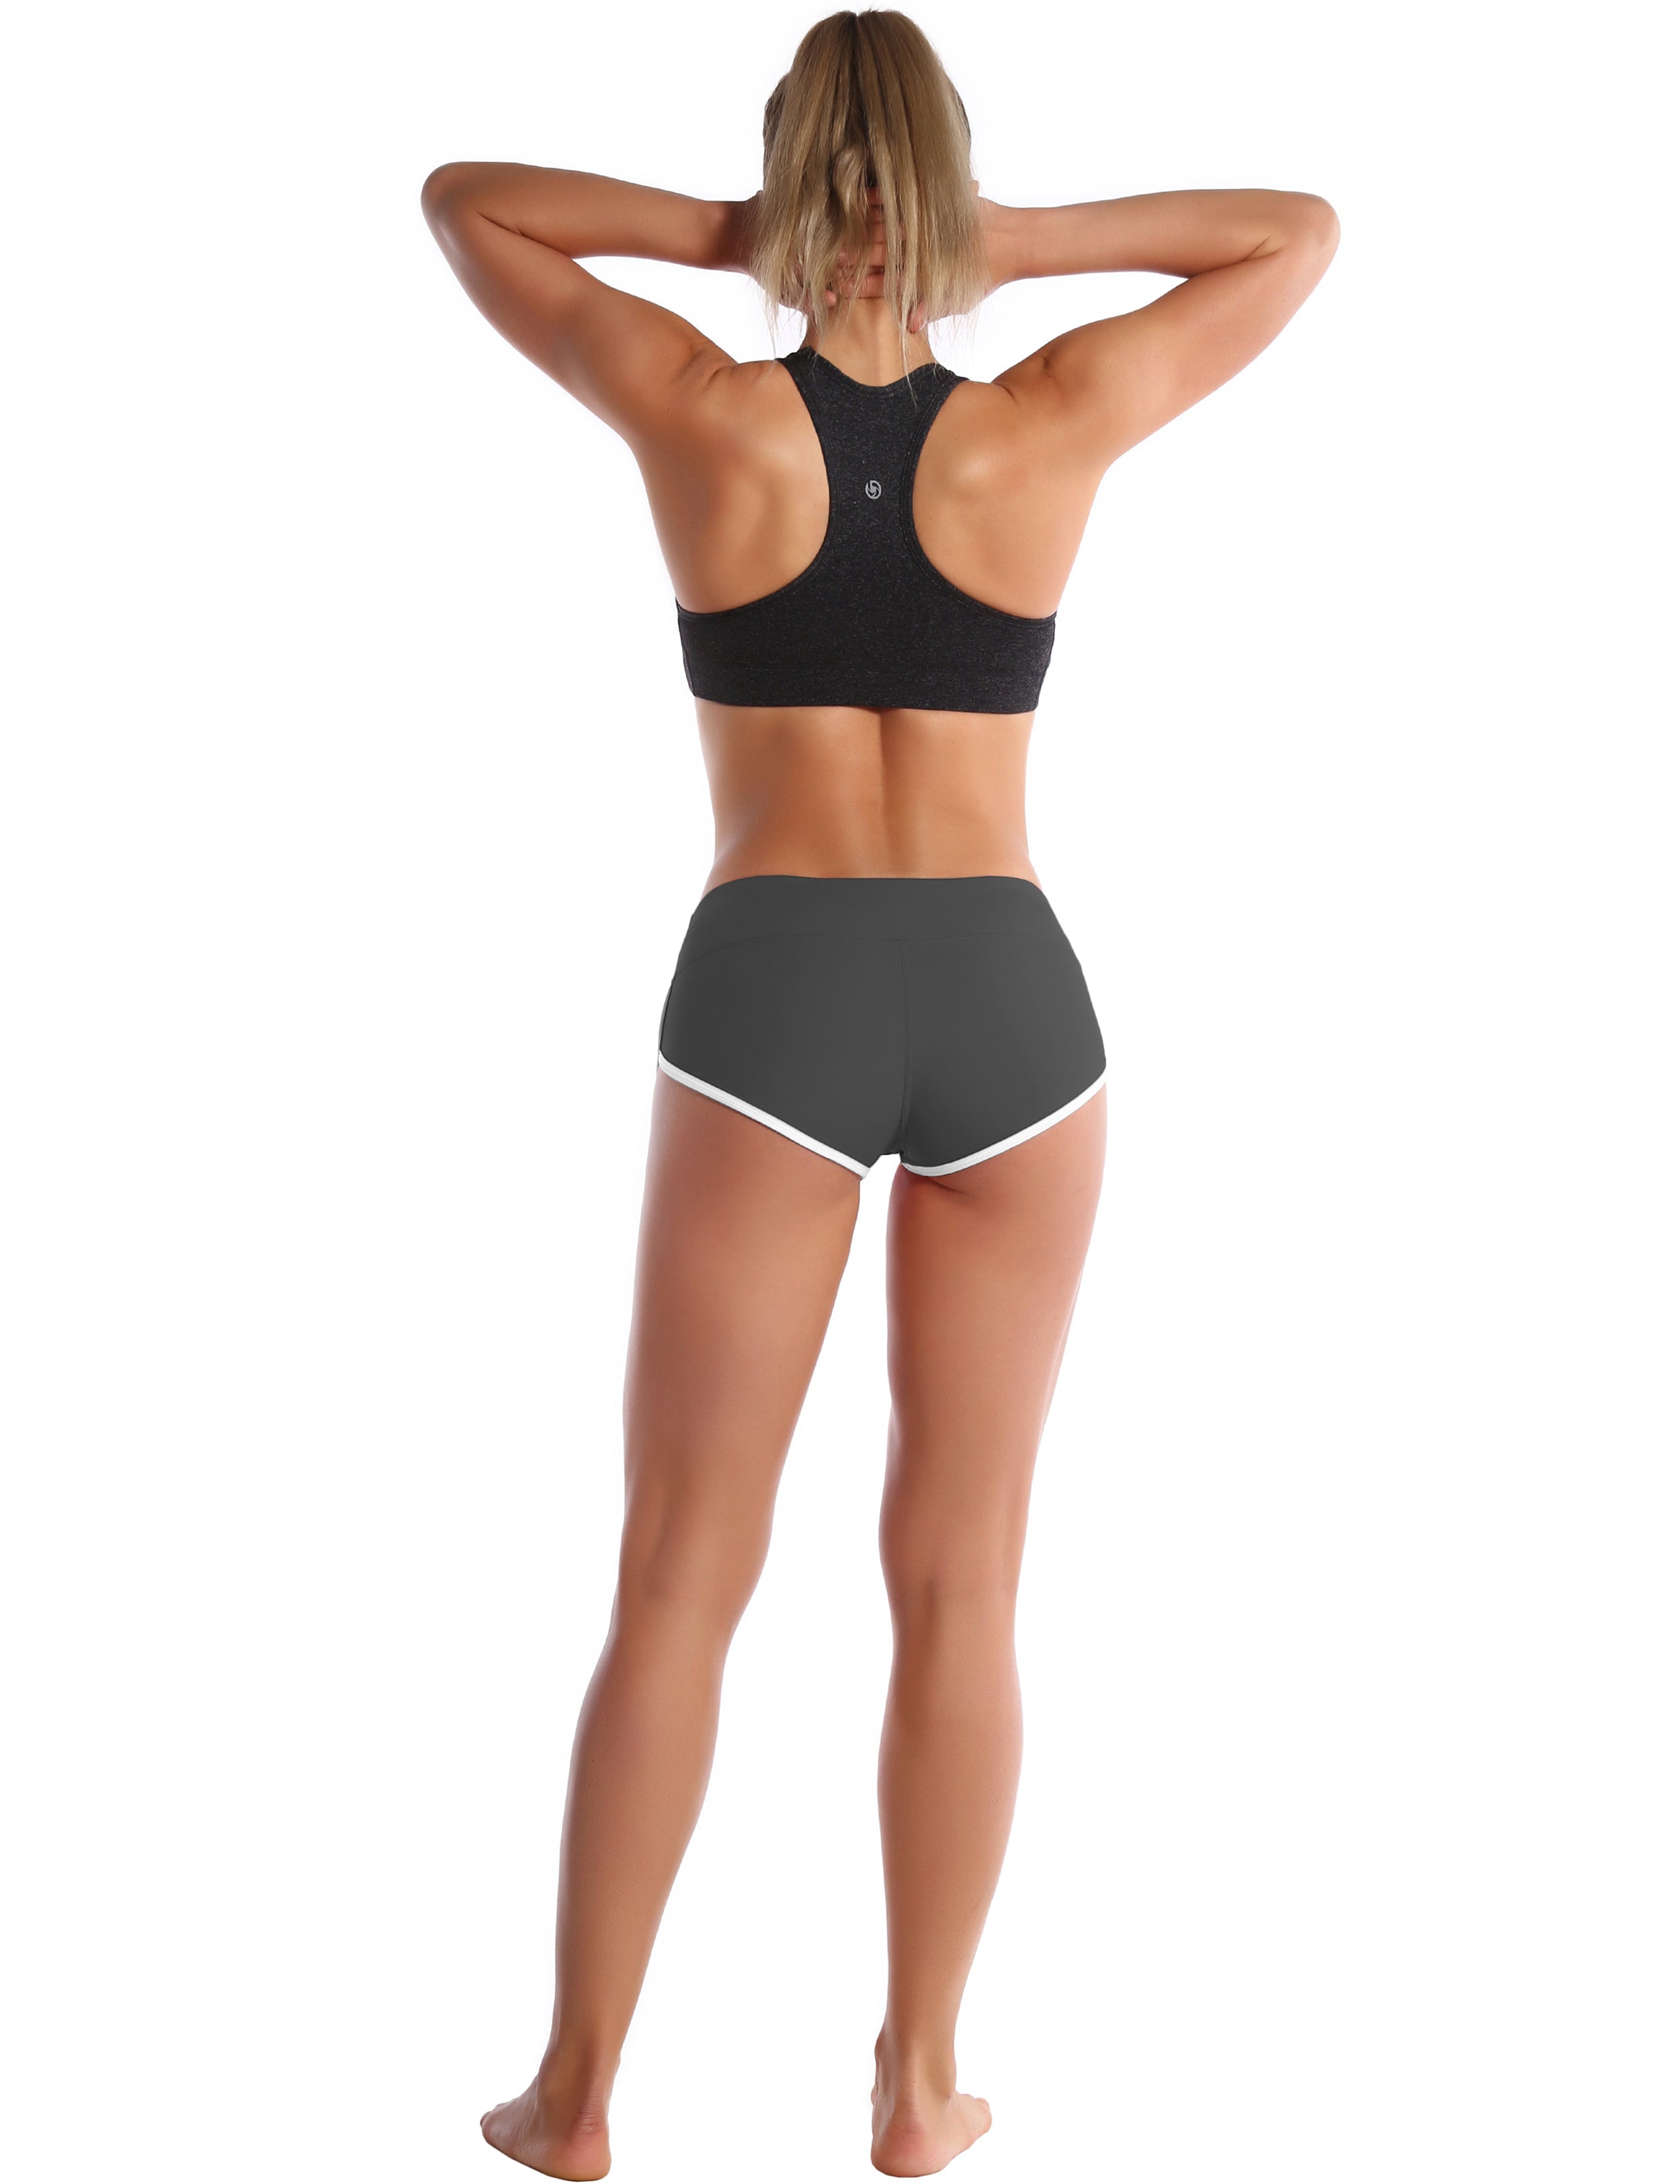 Sexy Booty Golf Shorts shadowcharcoal Sleek, soft, smooth and totally comfortable: our newest sexy style is here. Softest-ever fabric High elasticity High density 4-way stretch Fabric doesn't attract lint easily No see-through Moisture-wicking Machine wash 75%Nylon/25%Spandex